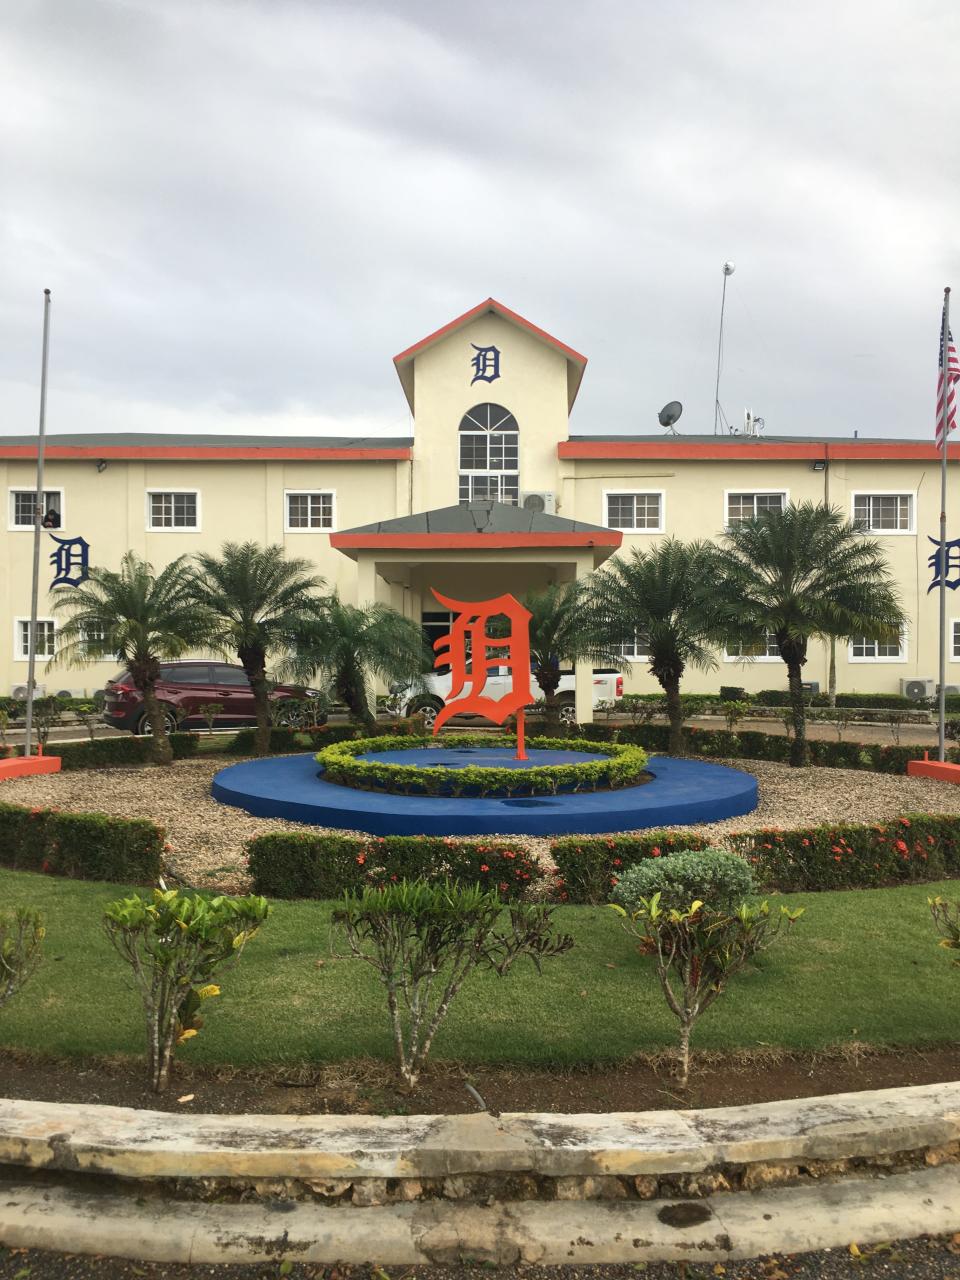 The exterior of the Detroit Tigers' player academy in San Pedro de Macoris, Dominican Republic, as seen in March, 2020.